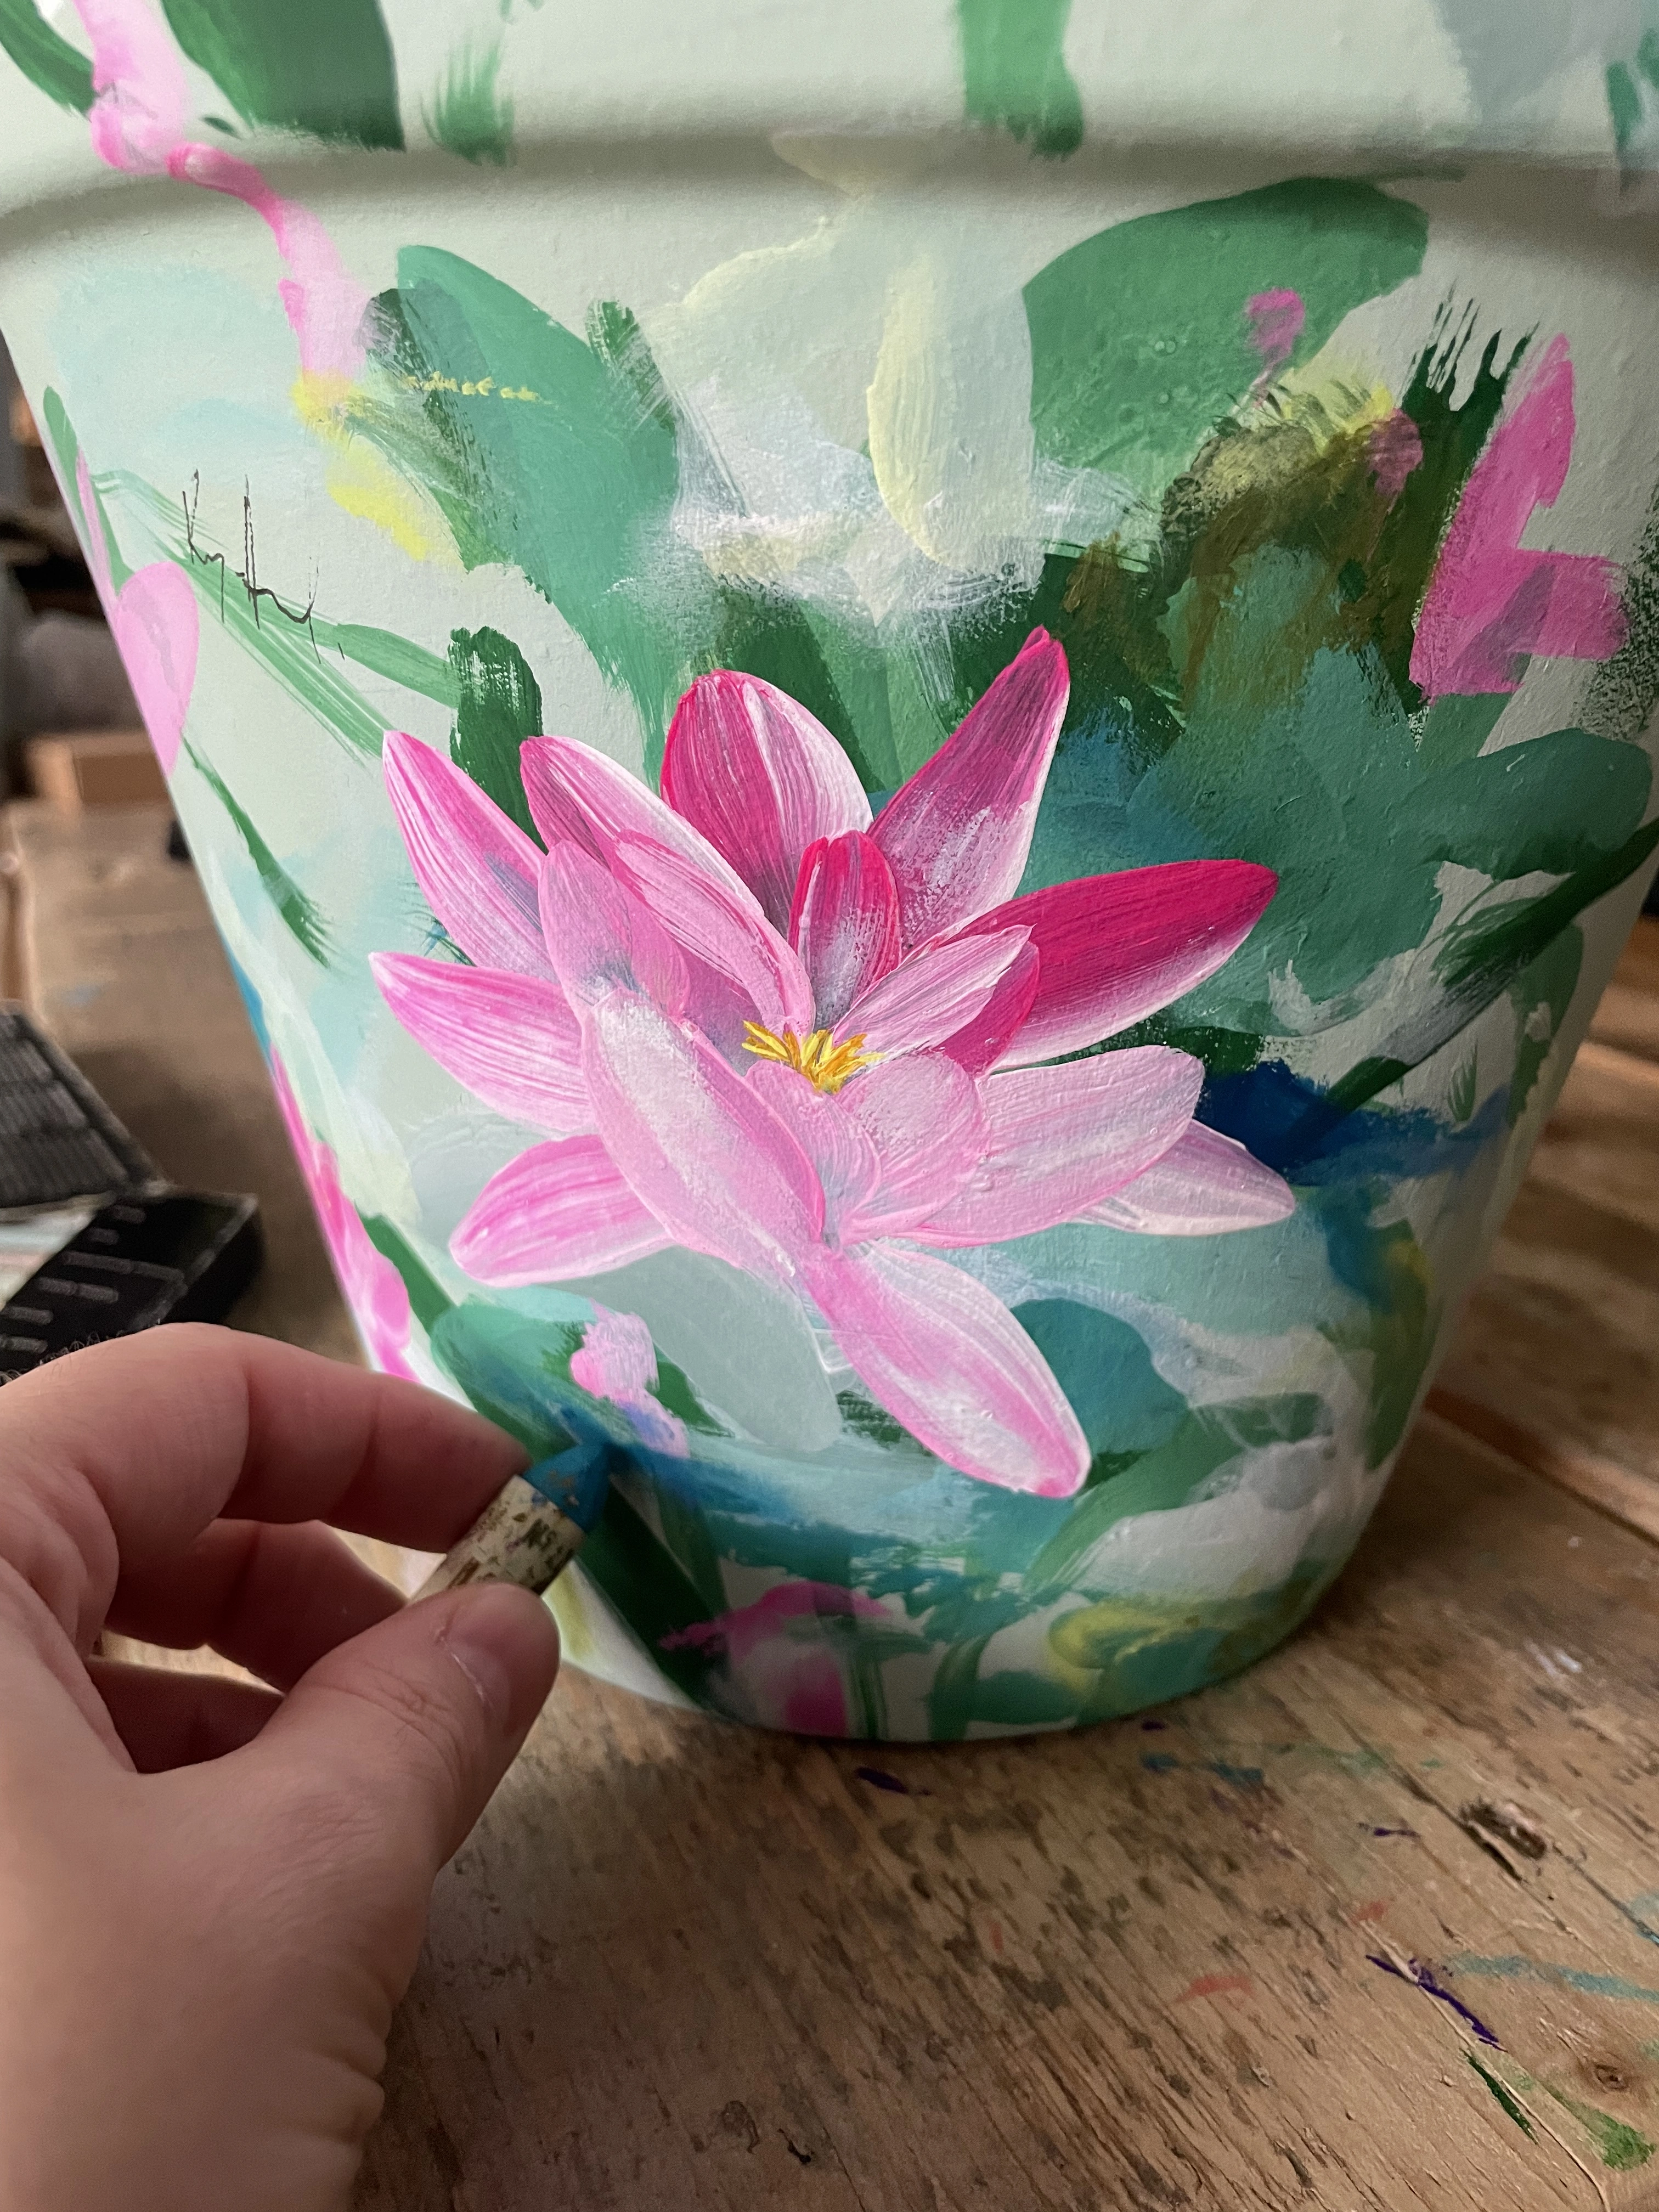 Kate, the artist is hand painting a plant pot in her studio for EmlynDelaney&Co